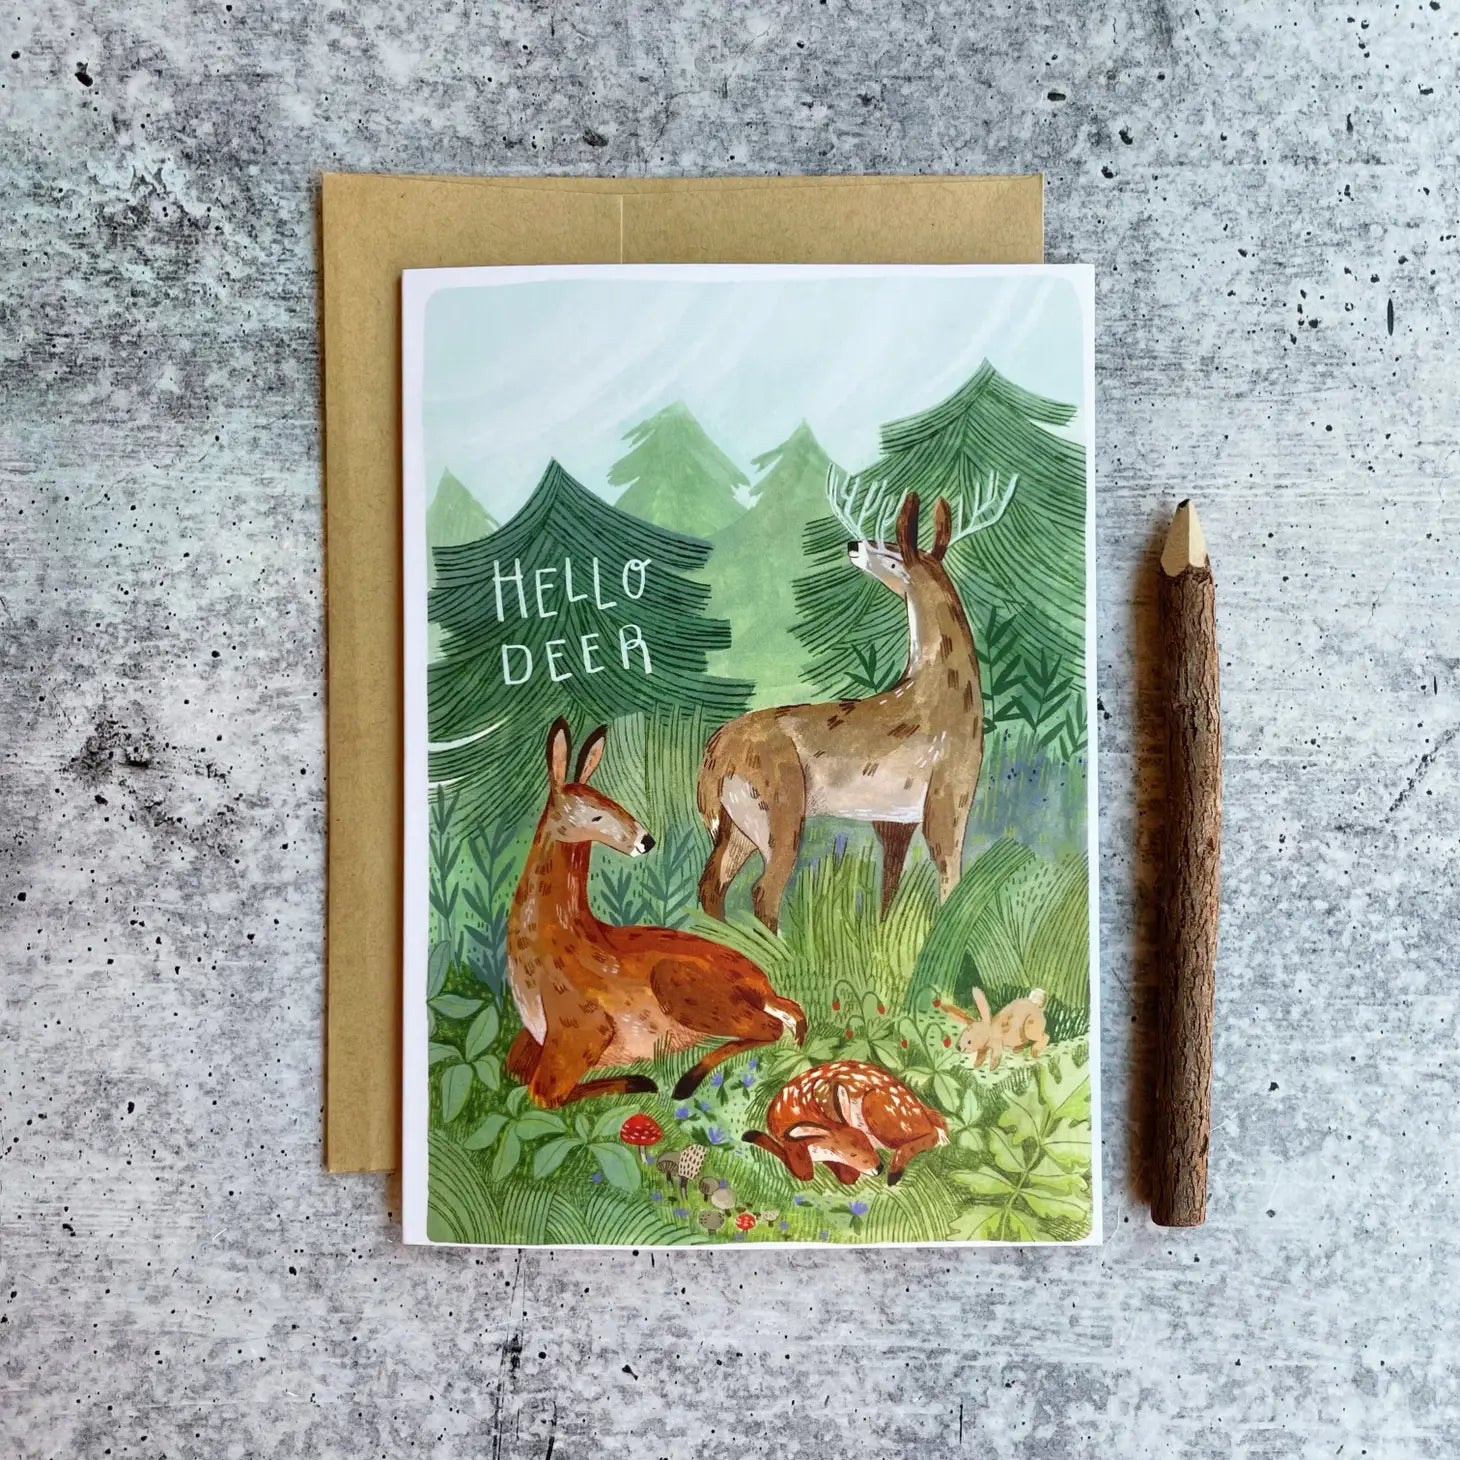 Hello Deer Card - Blank Greeting Card - Created by Little Pine Artistry Canyon & Cove